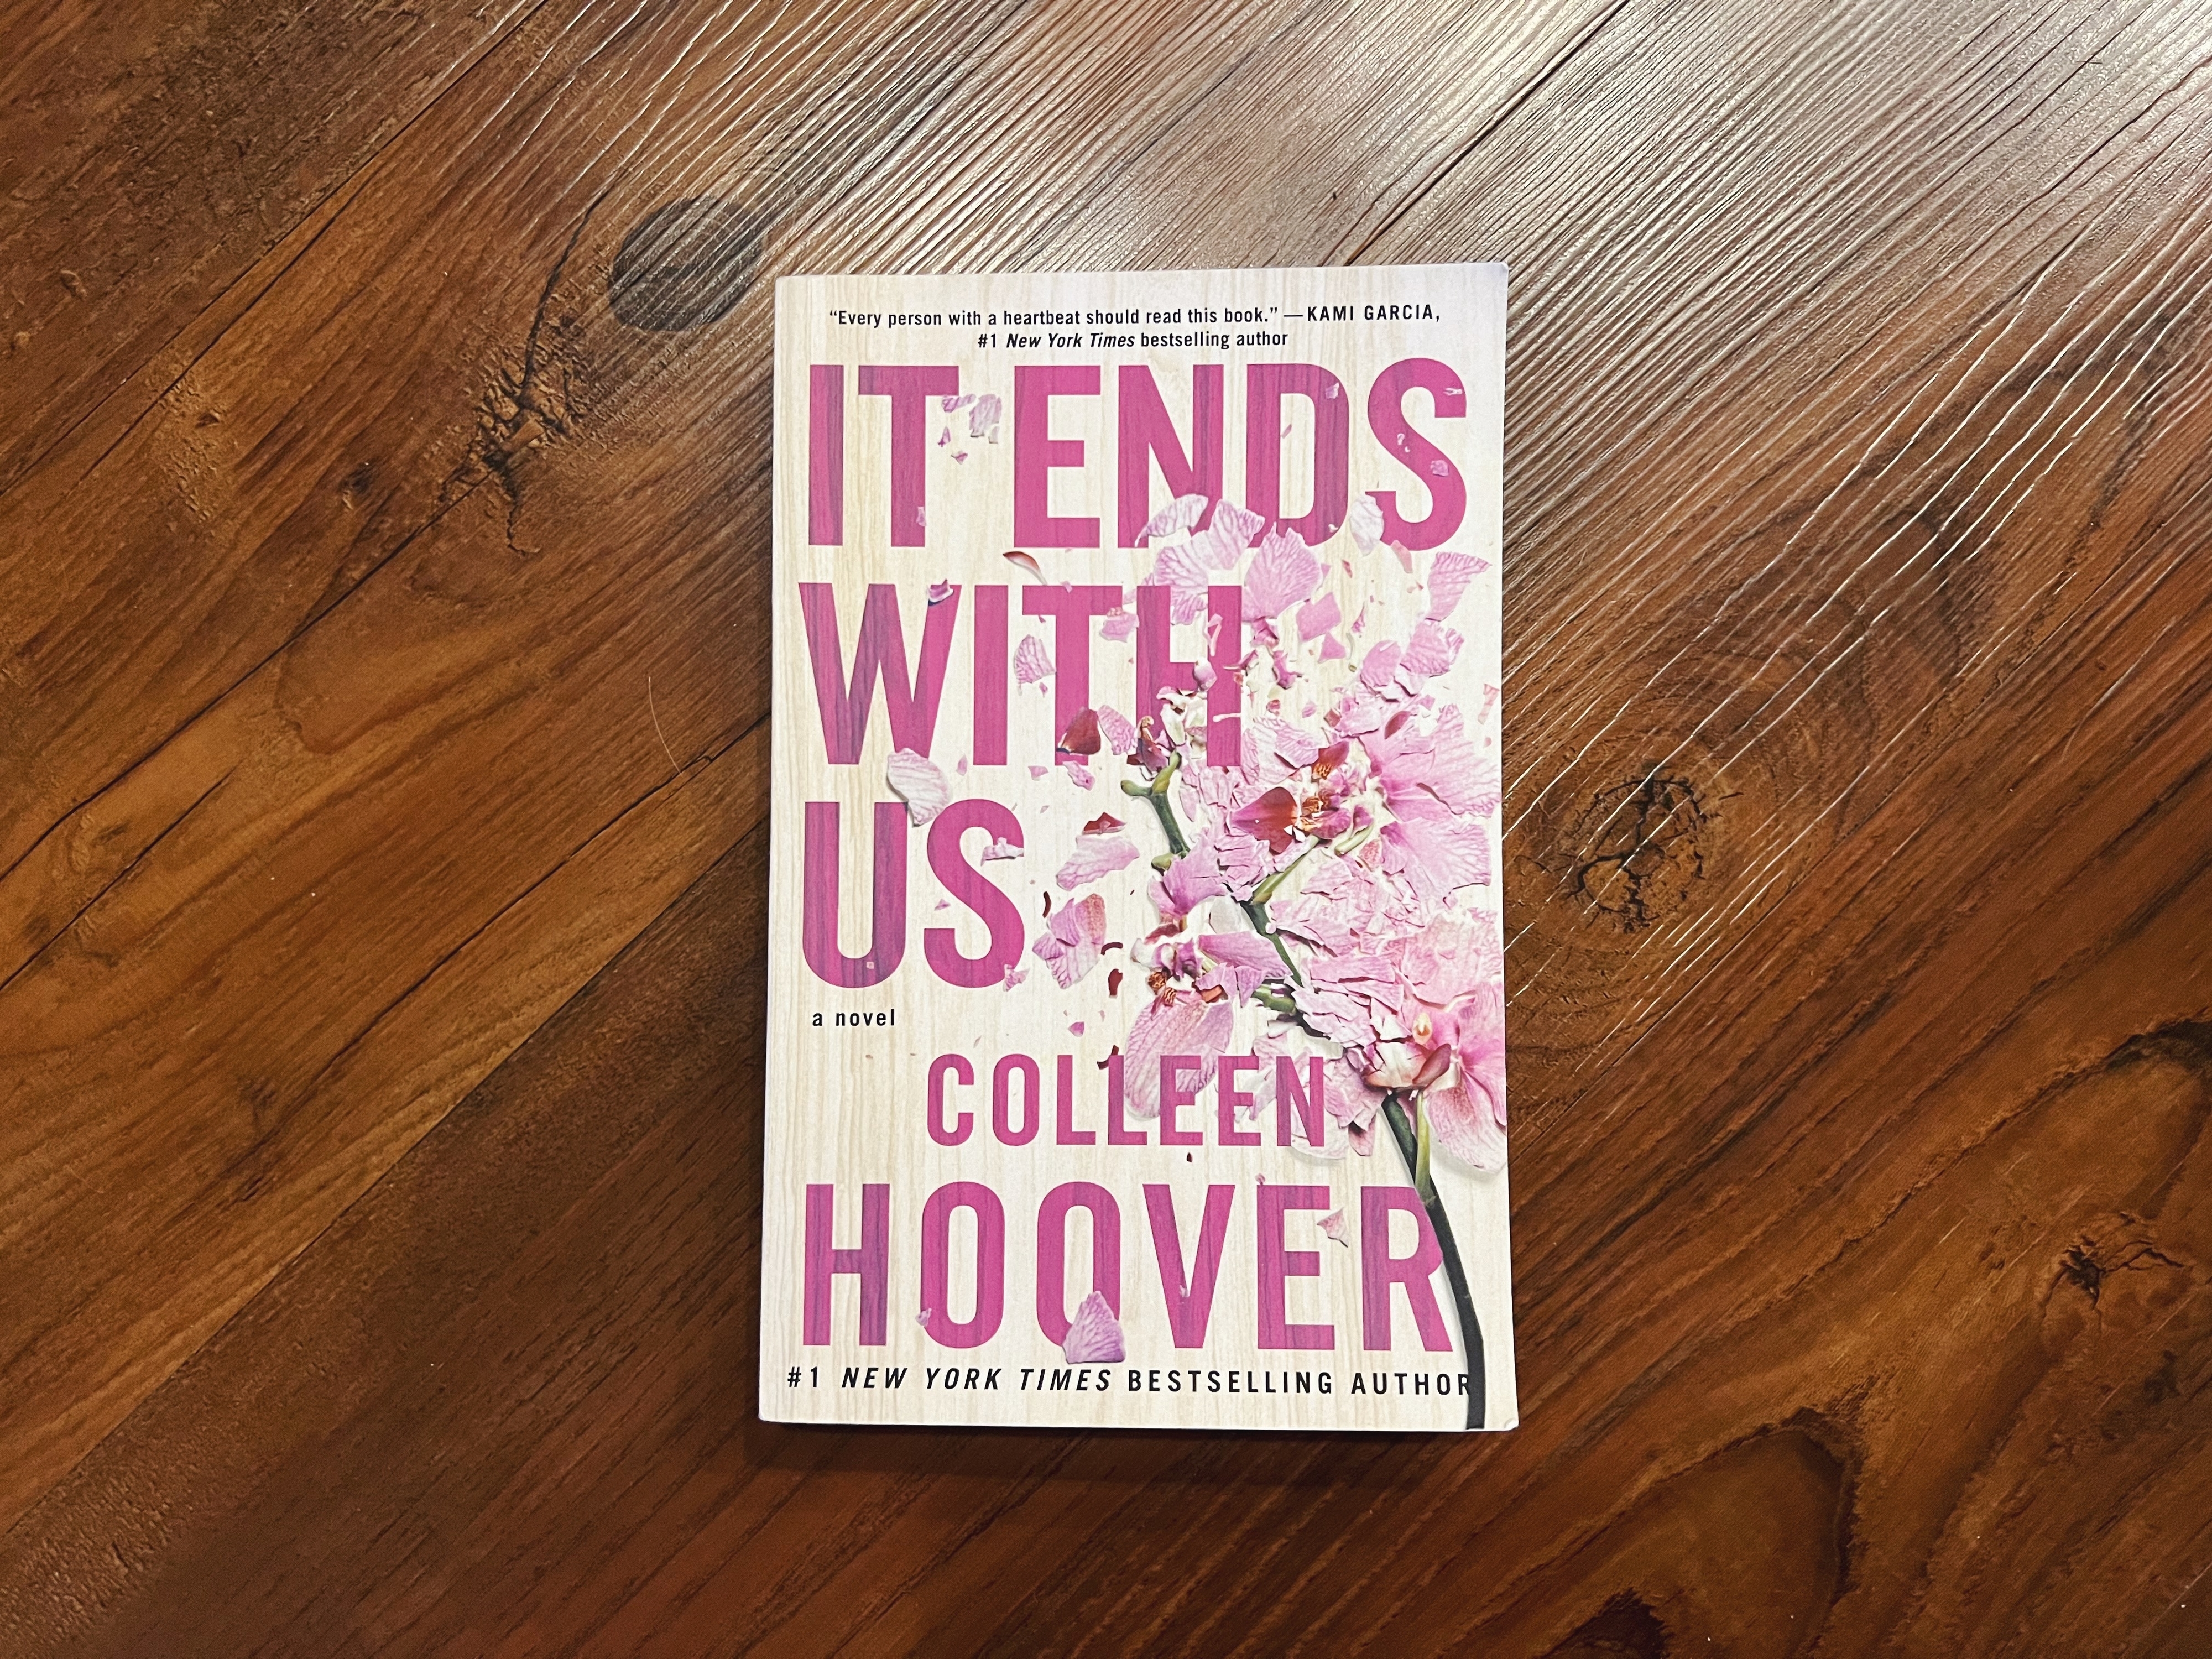 The image shows the book &#x27;It Ends With Us&#x27; by Colleen Hoover lying on a wooden surface